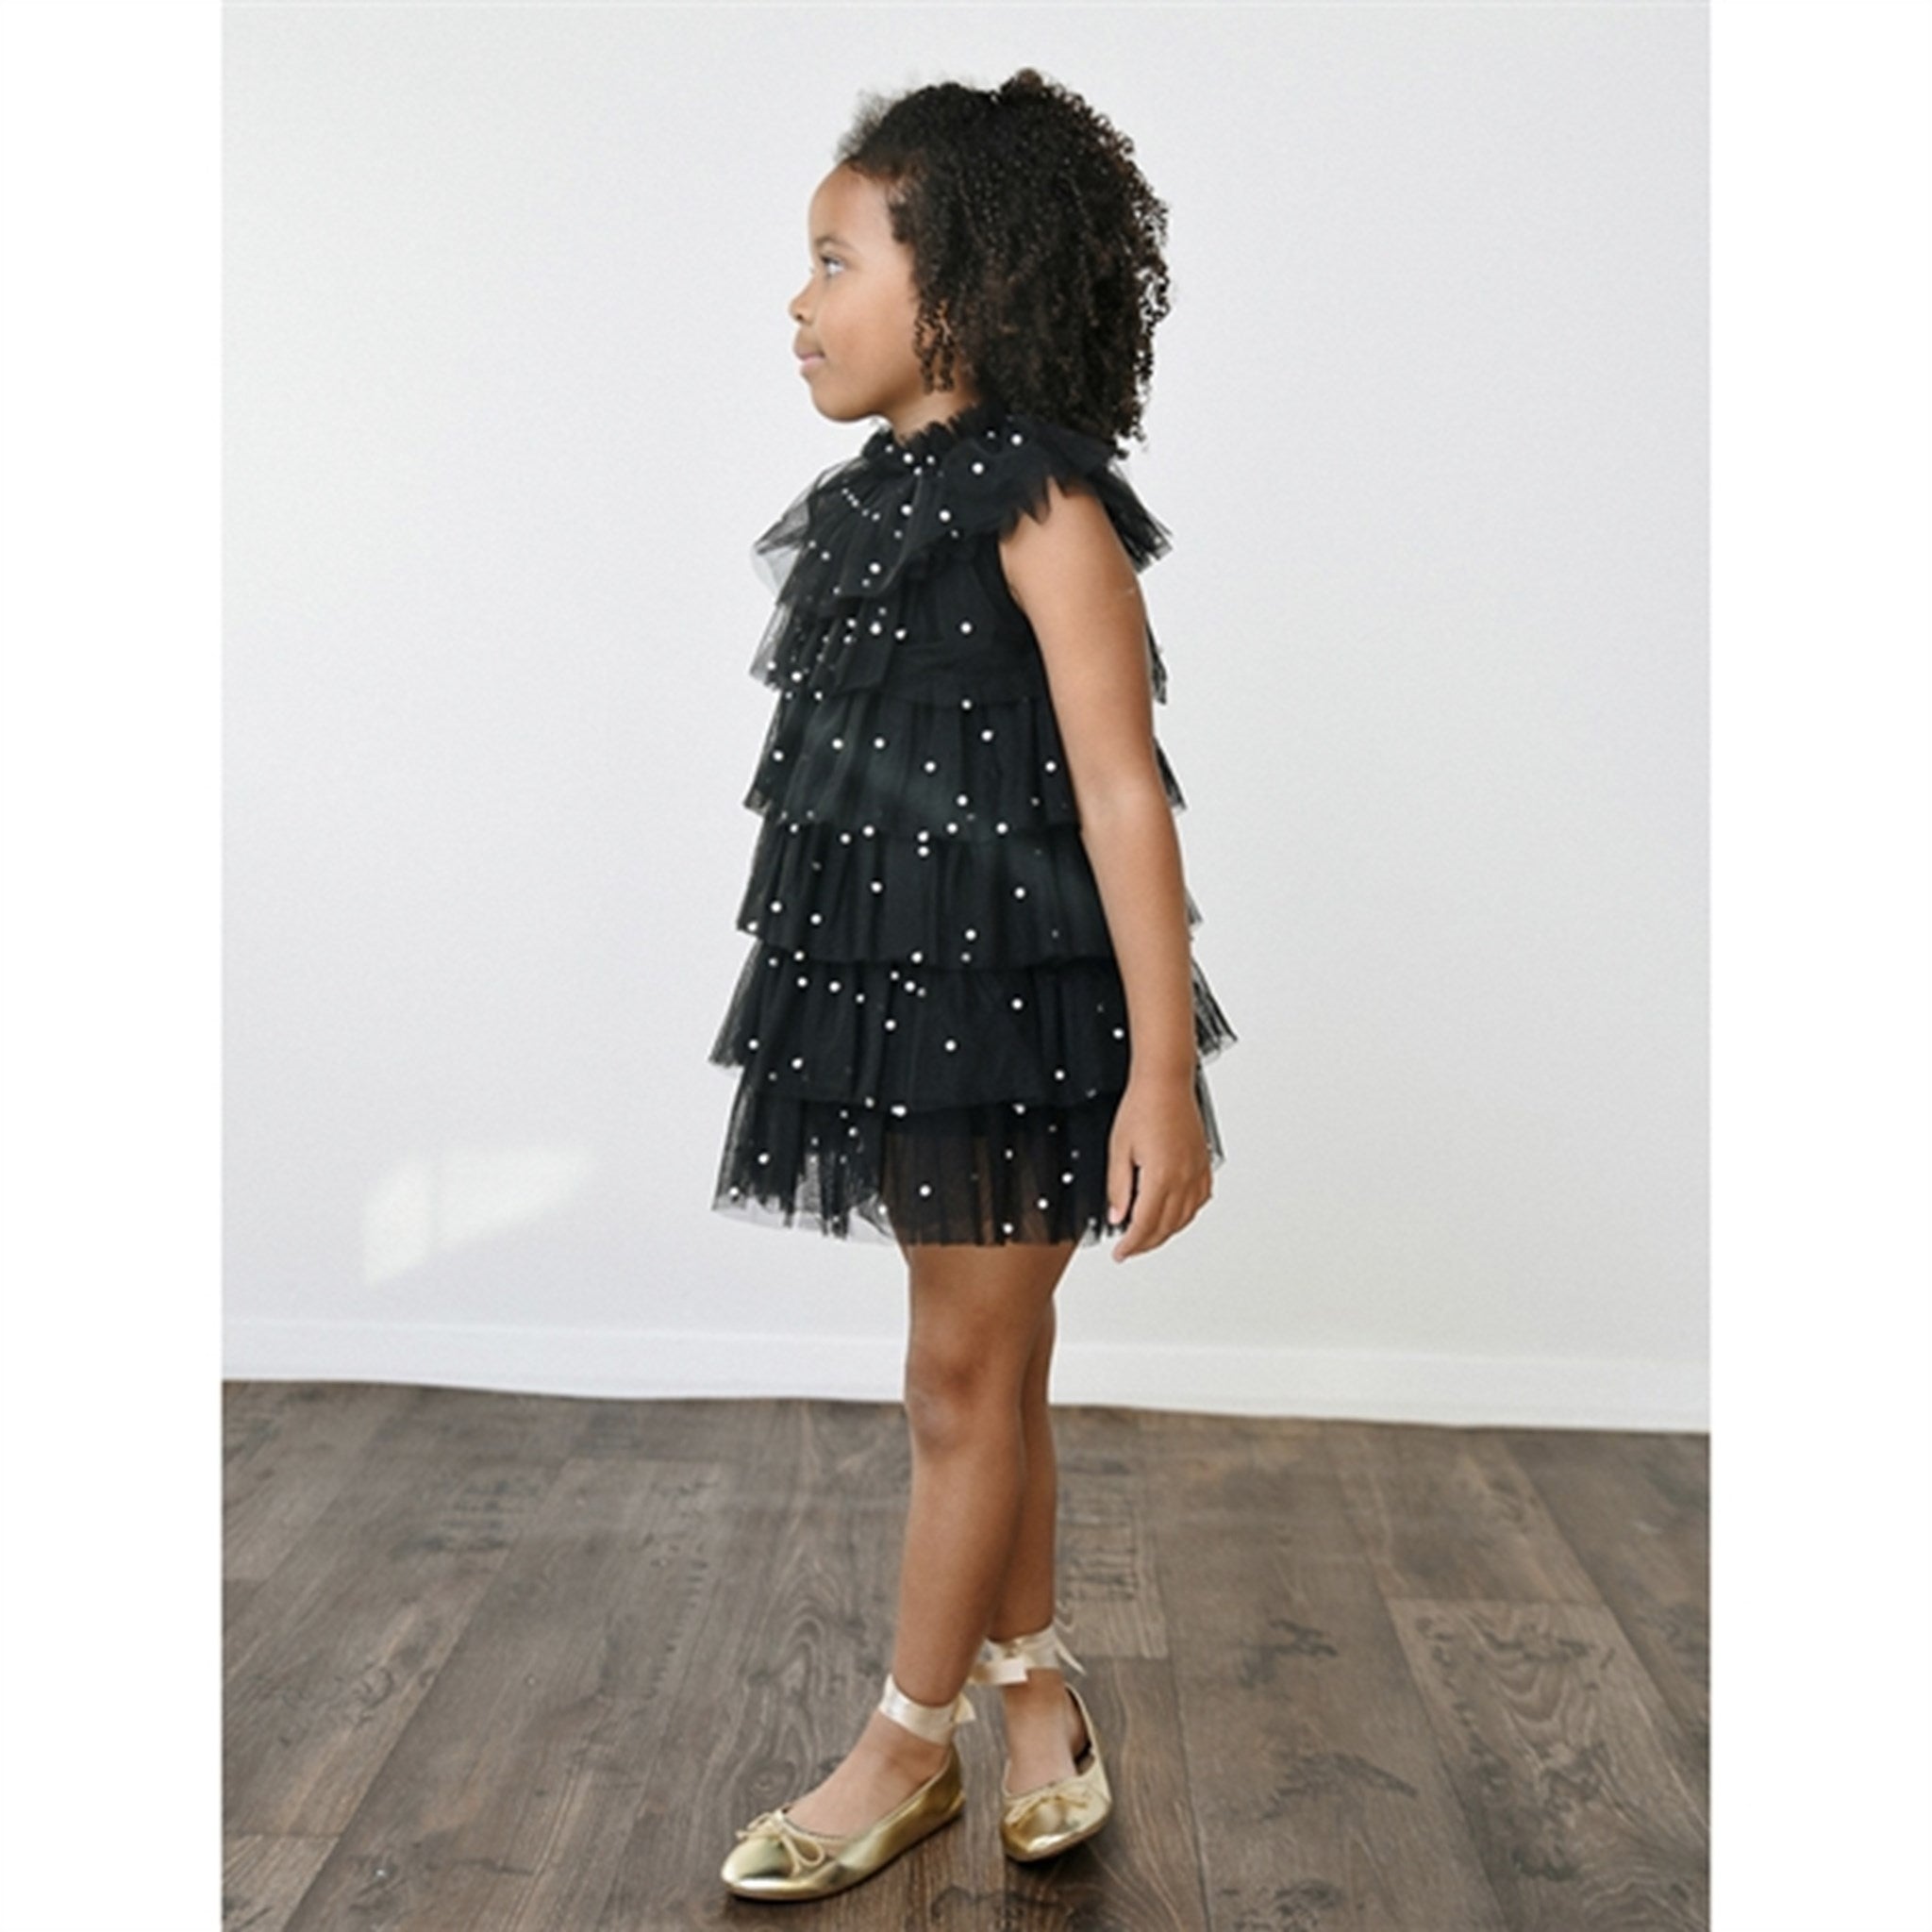 Dolly by Le Petit Tom Pearl Tutully Tiered Tulle Tuttu Klänning Black 4